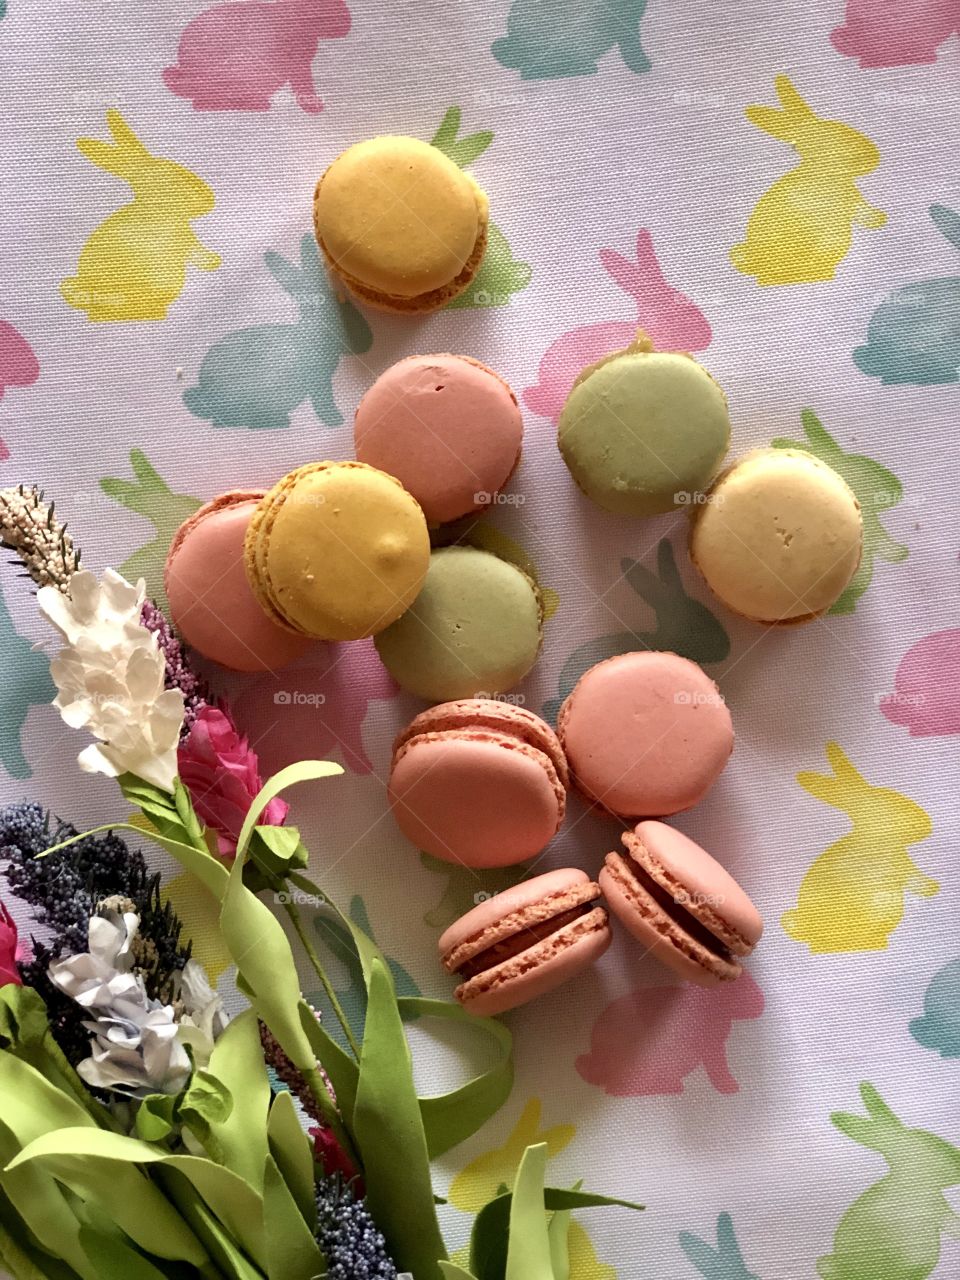 Nothing Says Easter Like Macaroons, Flowers and Bunnies! Foap Mission 